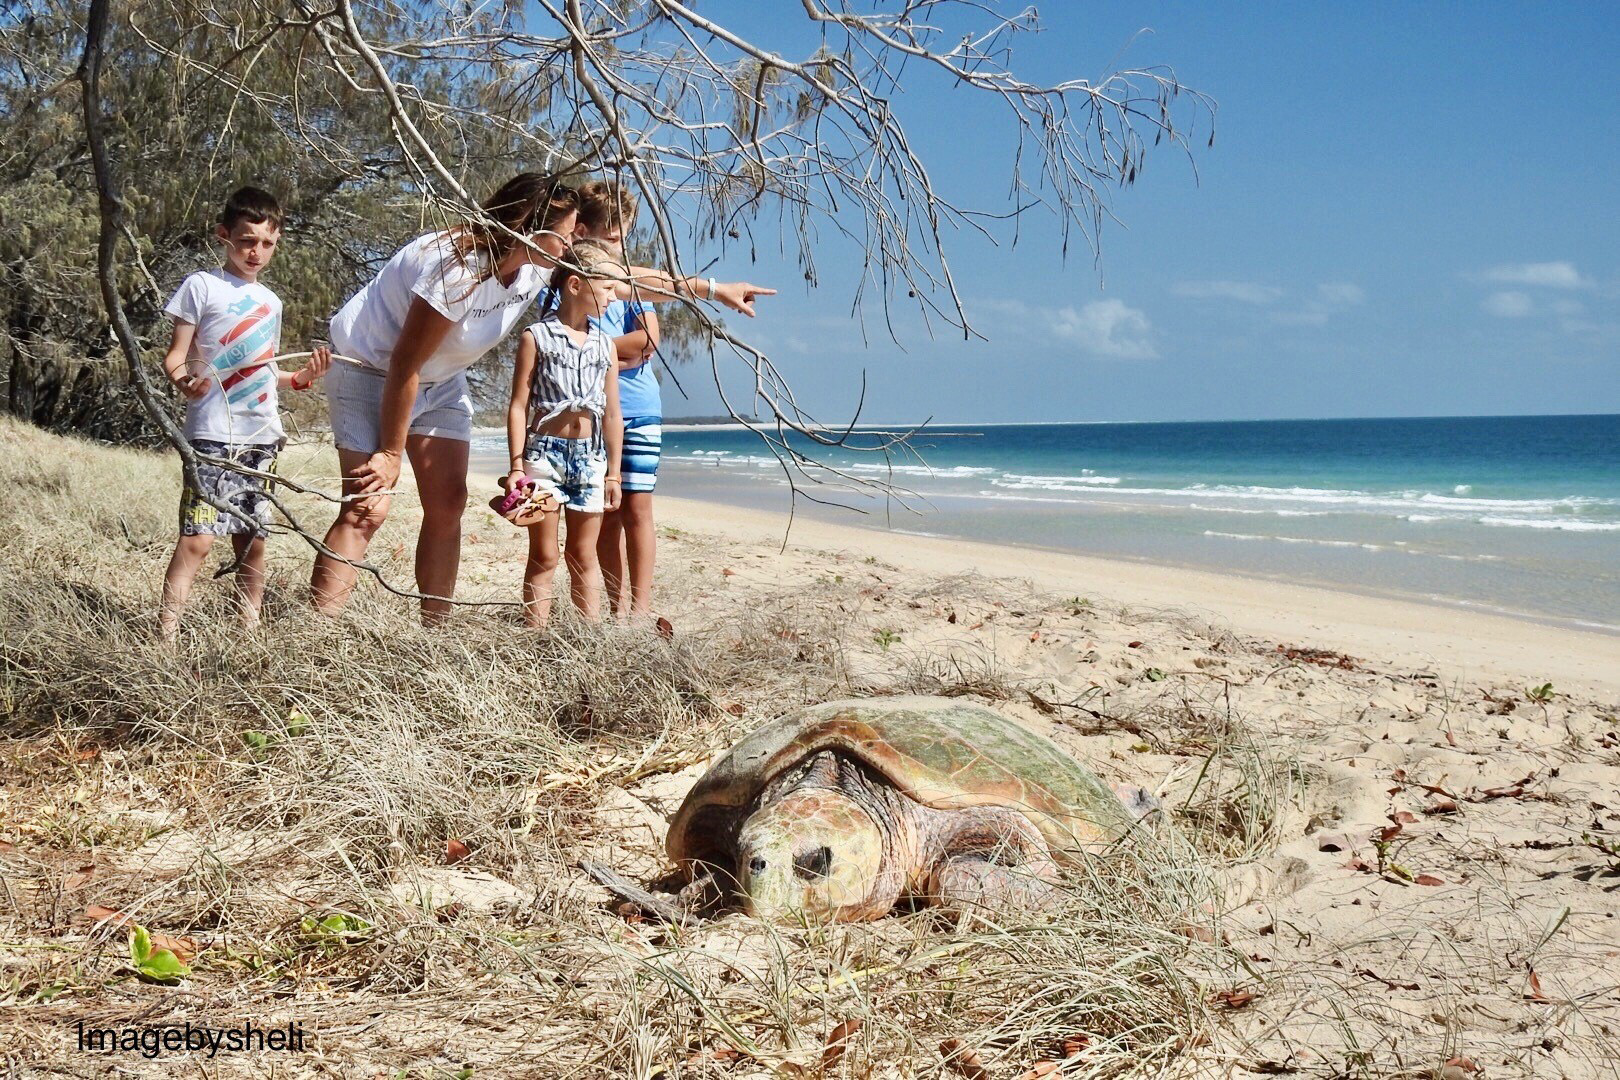 Woodgate Beach holidaymakers were entranced with the sight of a loggerhead turtle laying its eggs near the Esplanade in broad daylight. Image courtesy of Michelle Cocking